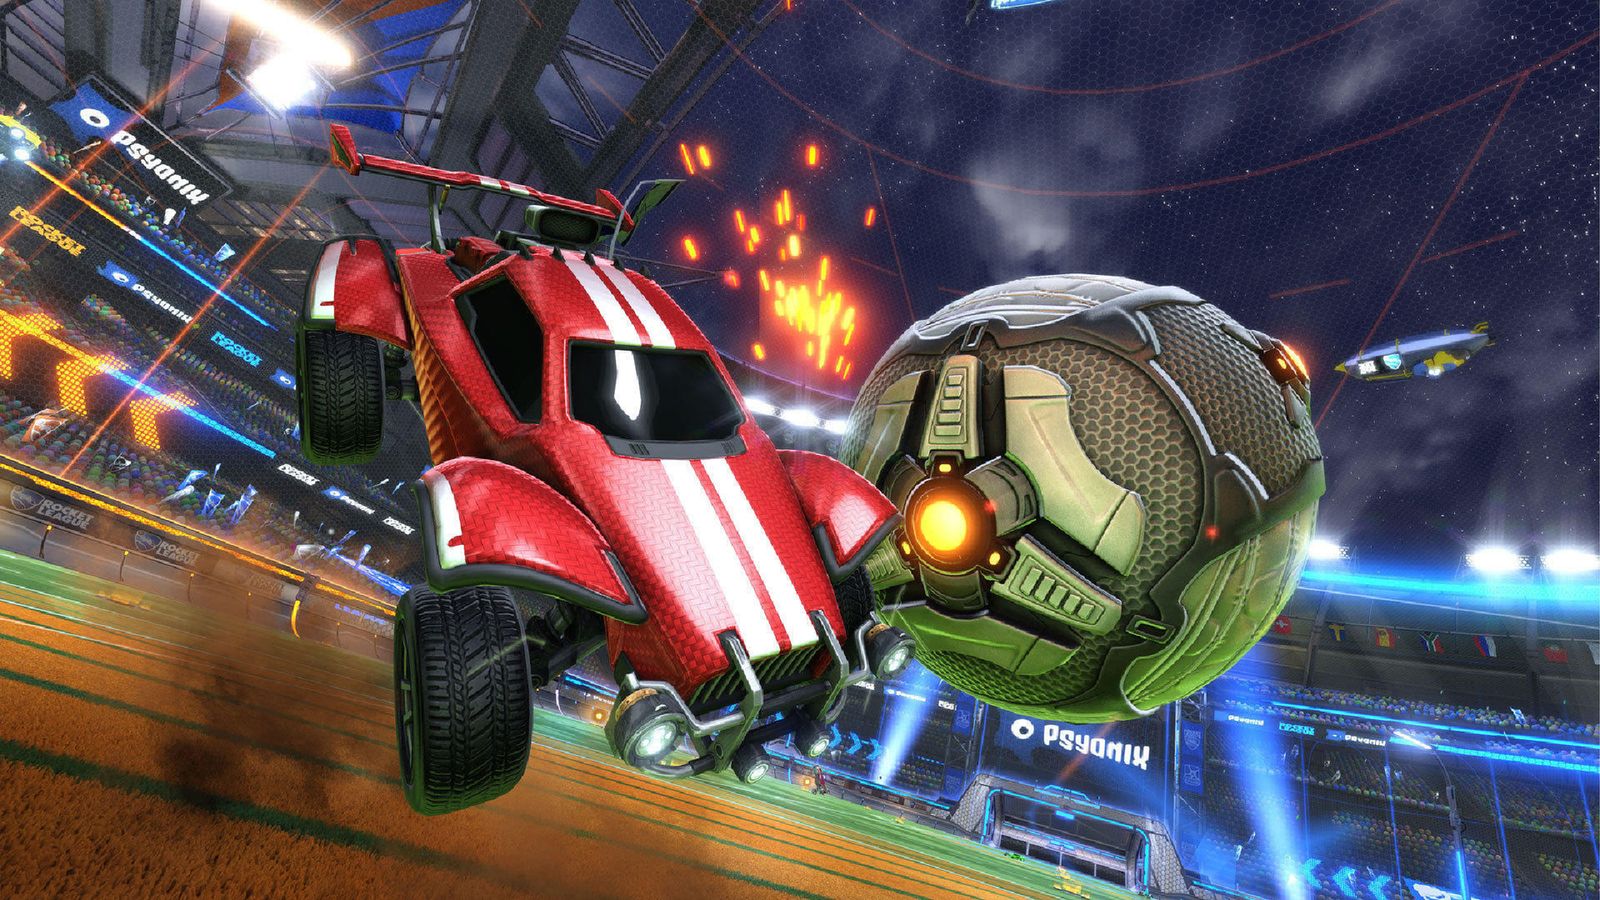 Rocket League in-game image of a red car attack a grey ball in the air.